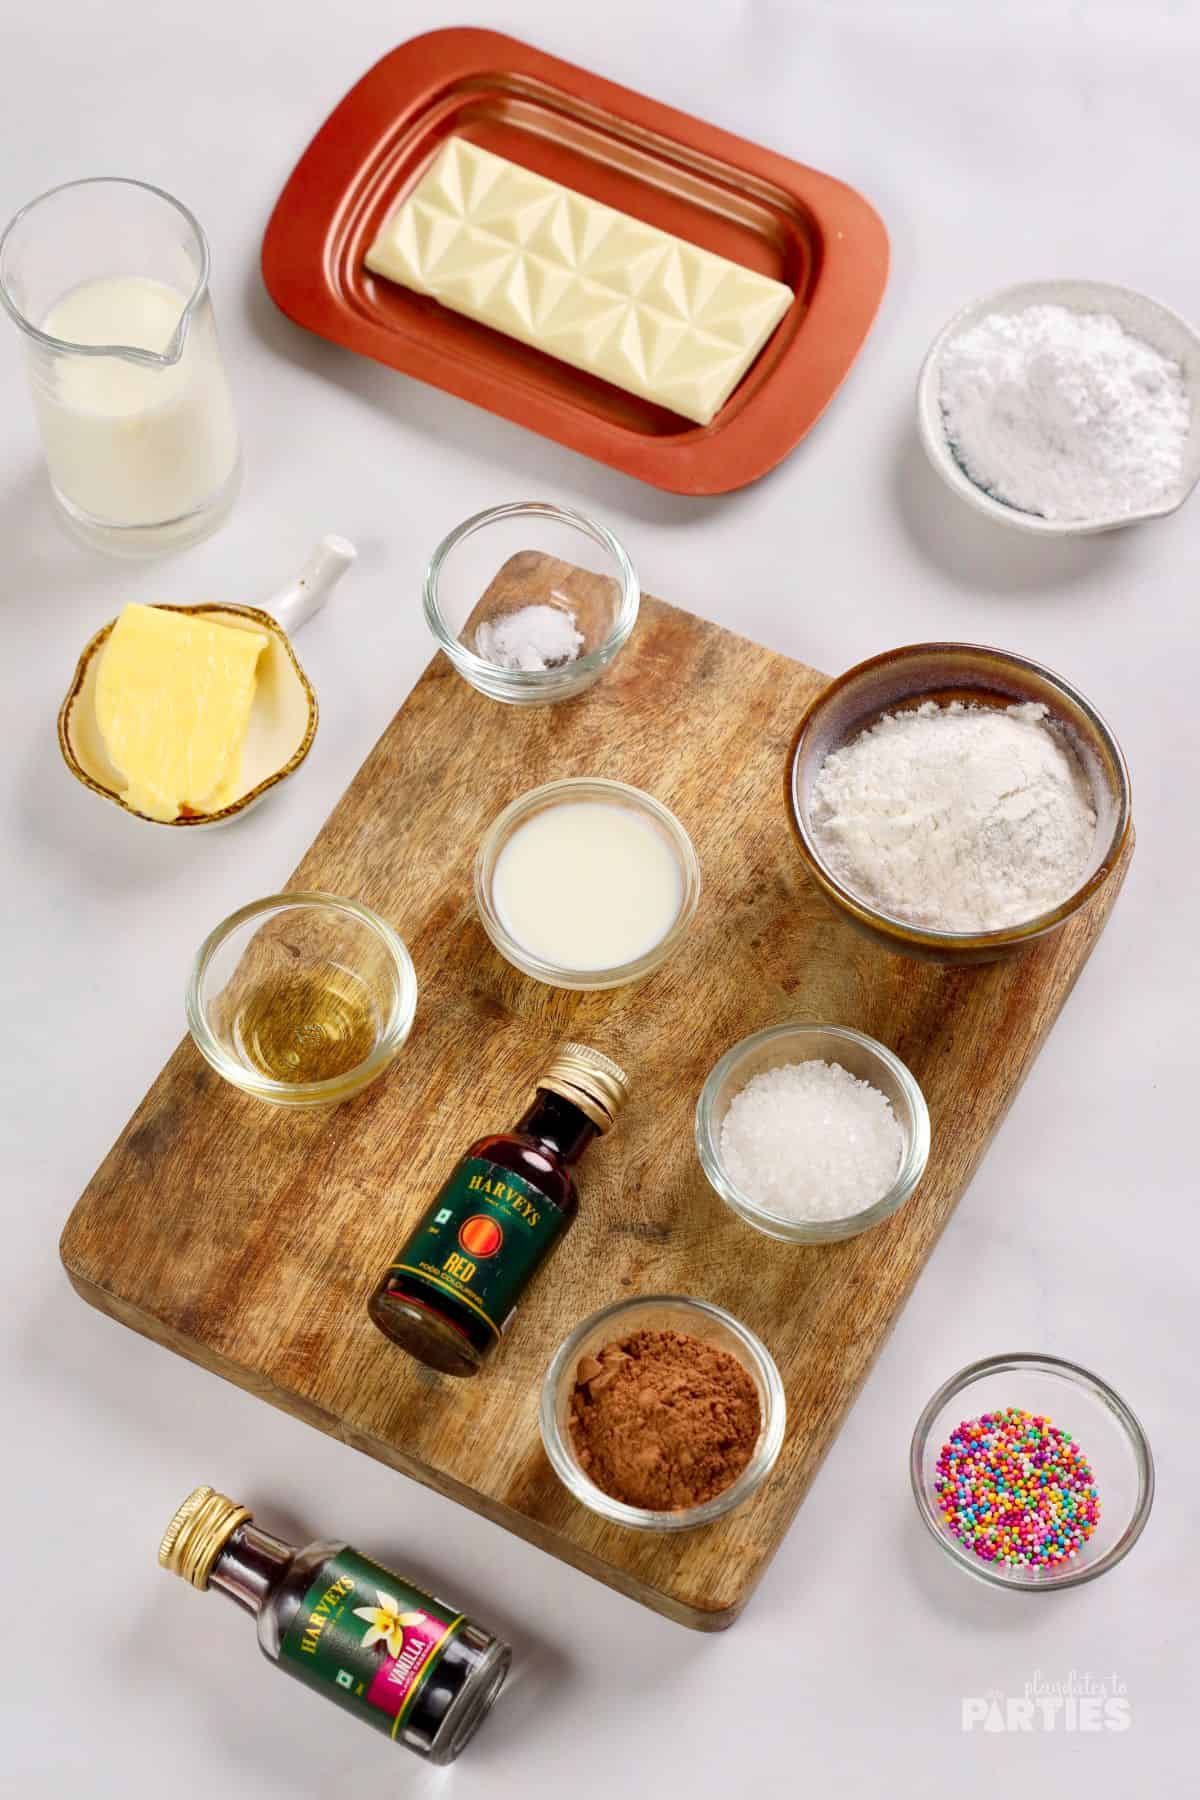 Baking ingredients on a white surface.